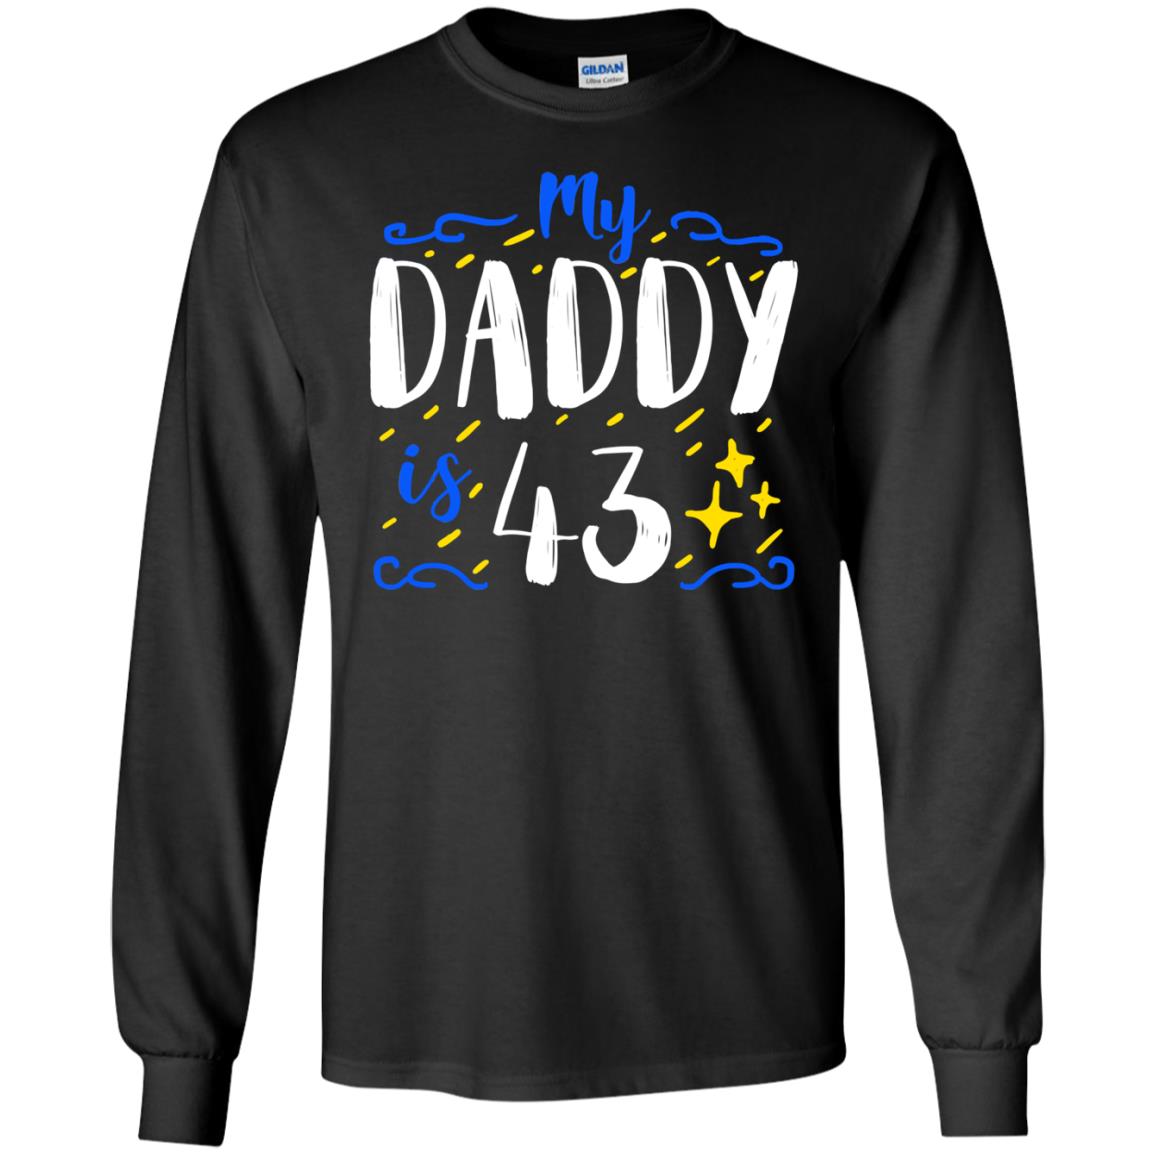 My Daddy Is 43 43rd Birthday Daddy Shirt For Sons Or DaughtersG240 Gildan LS Ultra Cotton T-Shirt